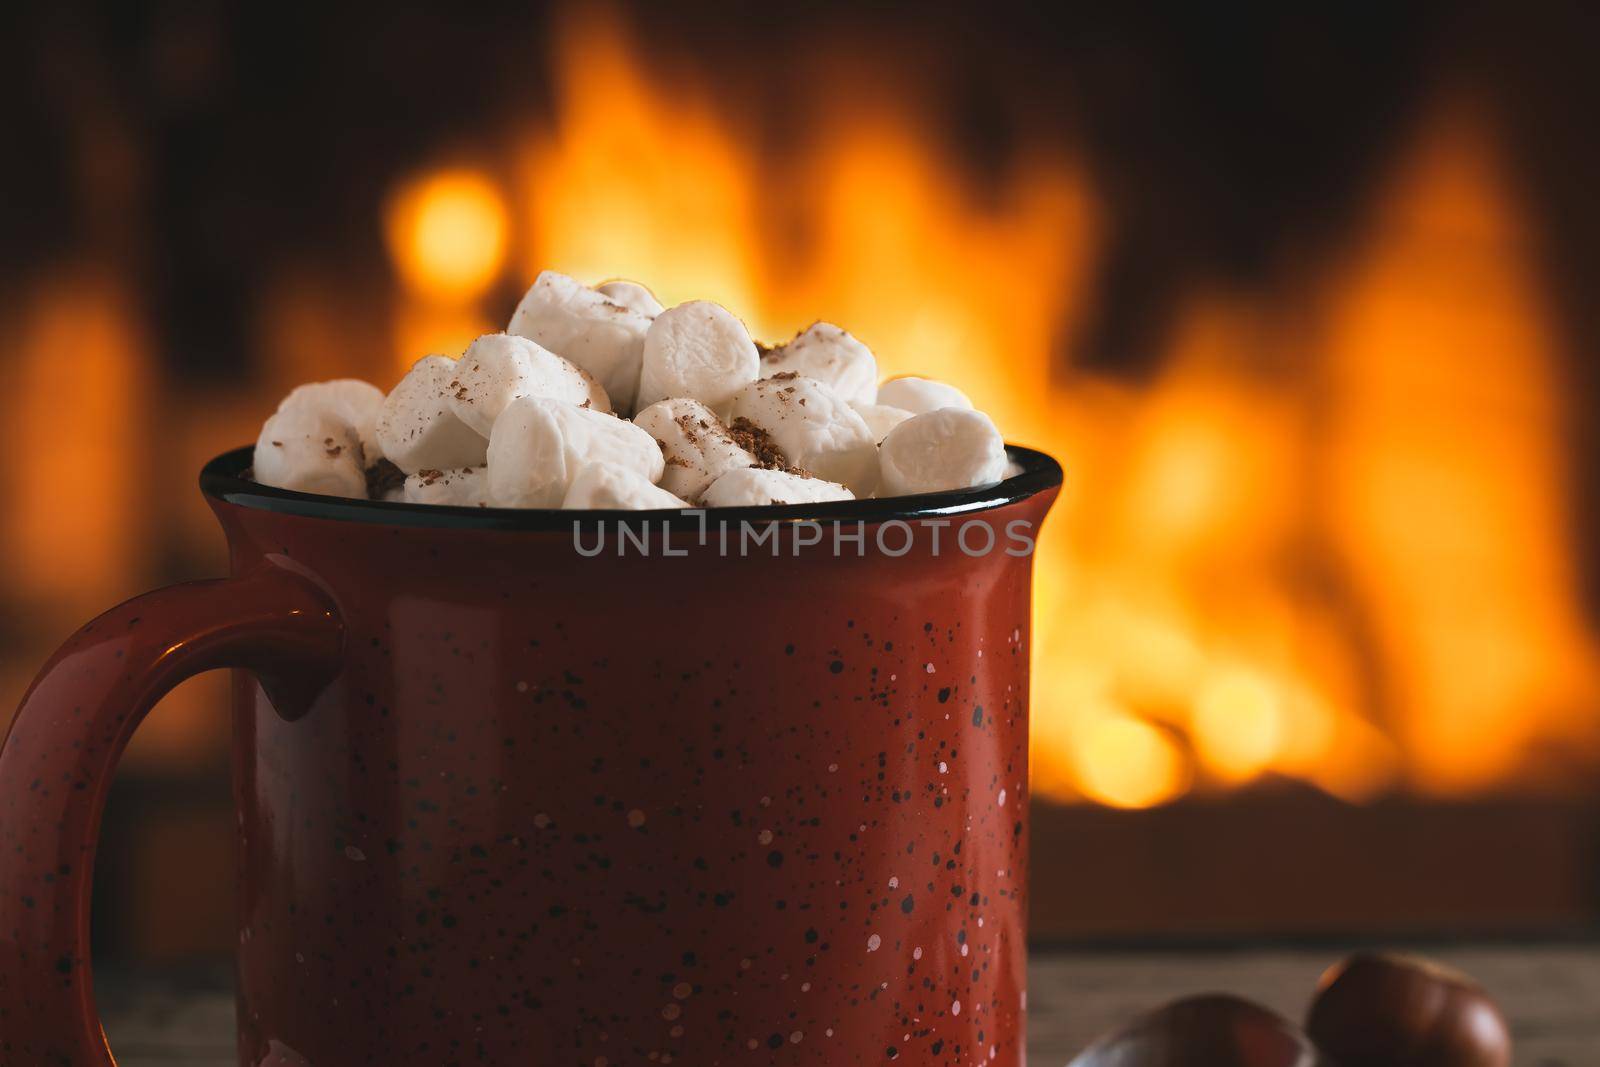 Cocoa with marshmallows and chocolate in a red mug on a wooden table near a burning fireplace.